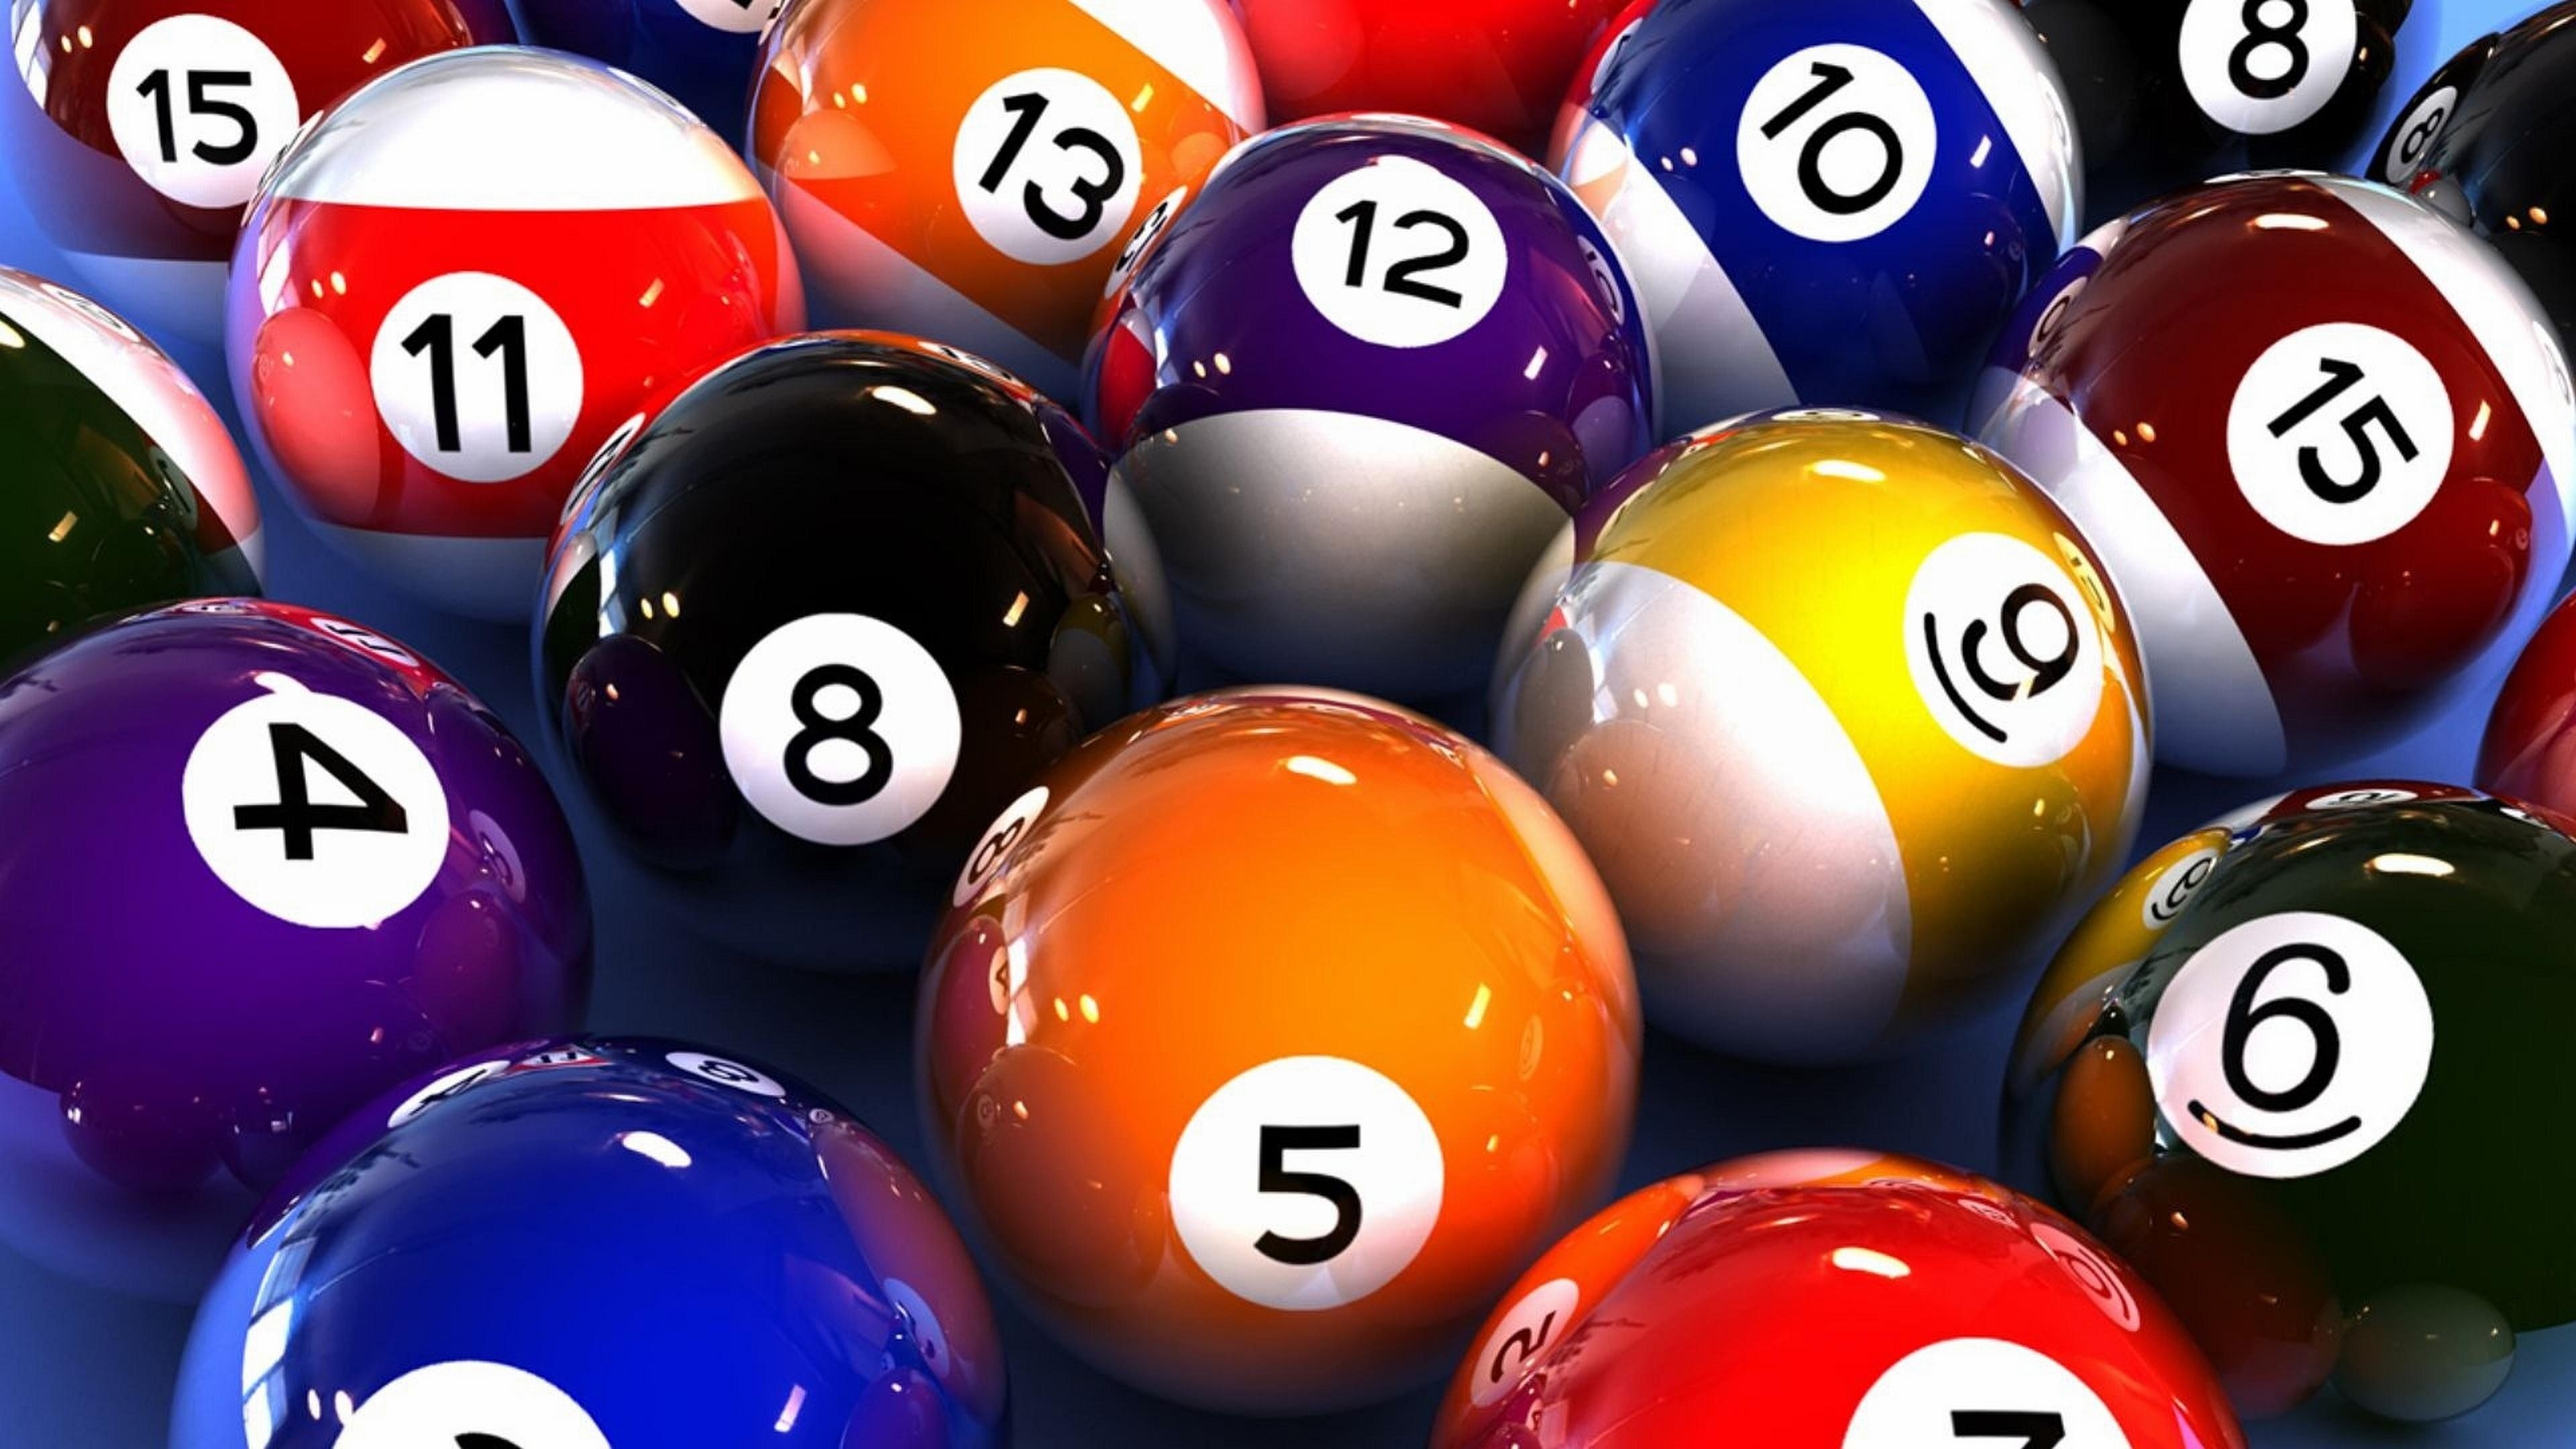 Pool (Cue Sports): Eight-ball billiard game, The most common style played around the world by professionals. 3840x2160 4K Wallpaper.